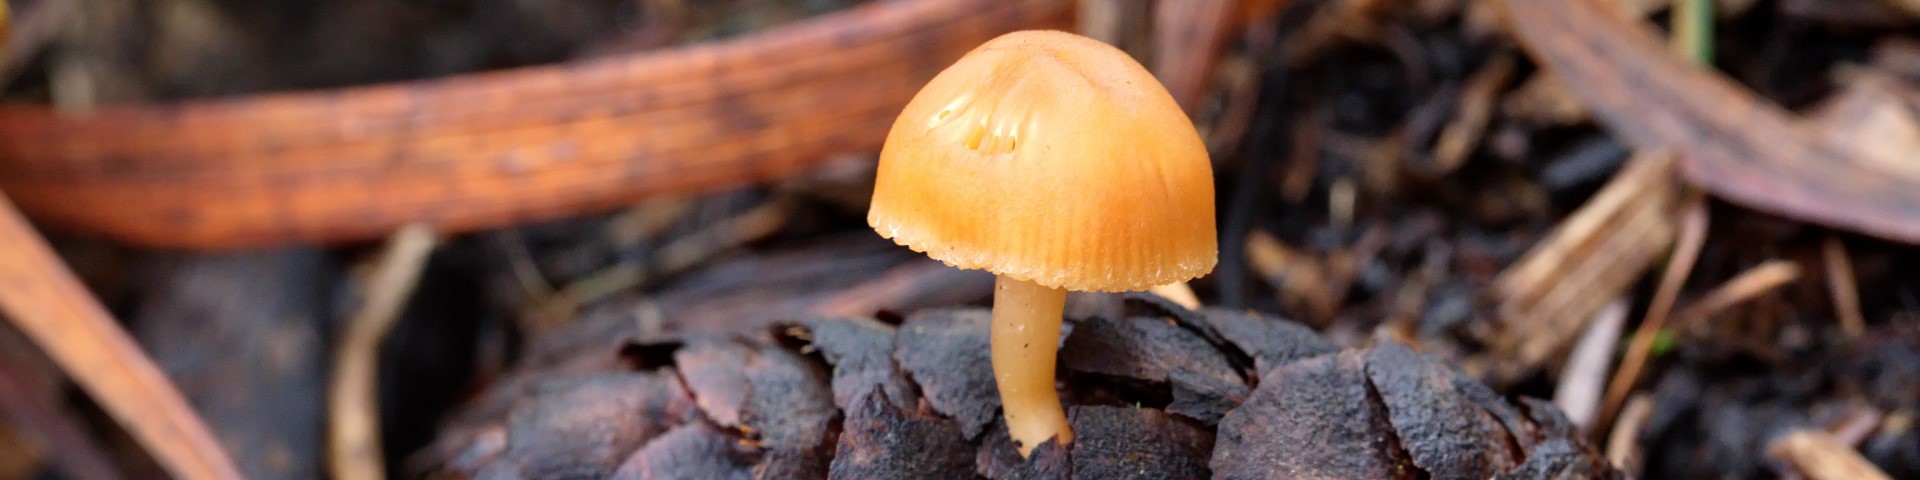 WAITLIST-Mushroom Discovery Walk (in-person, outside)